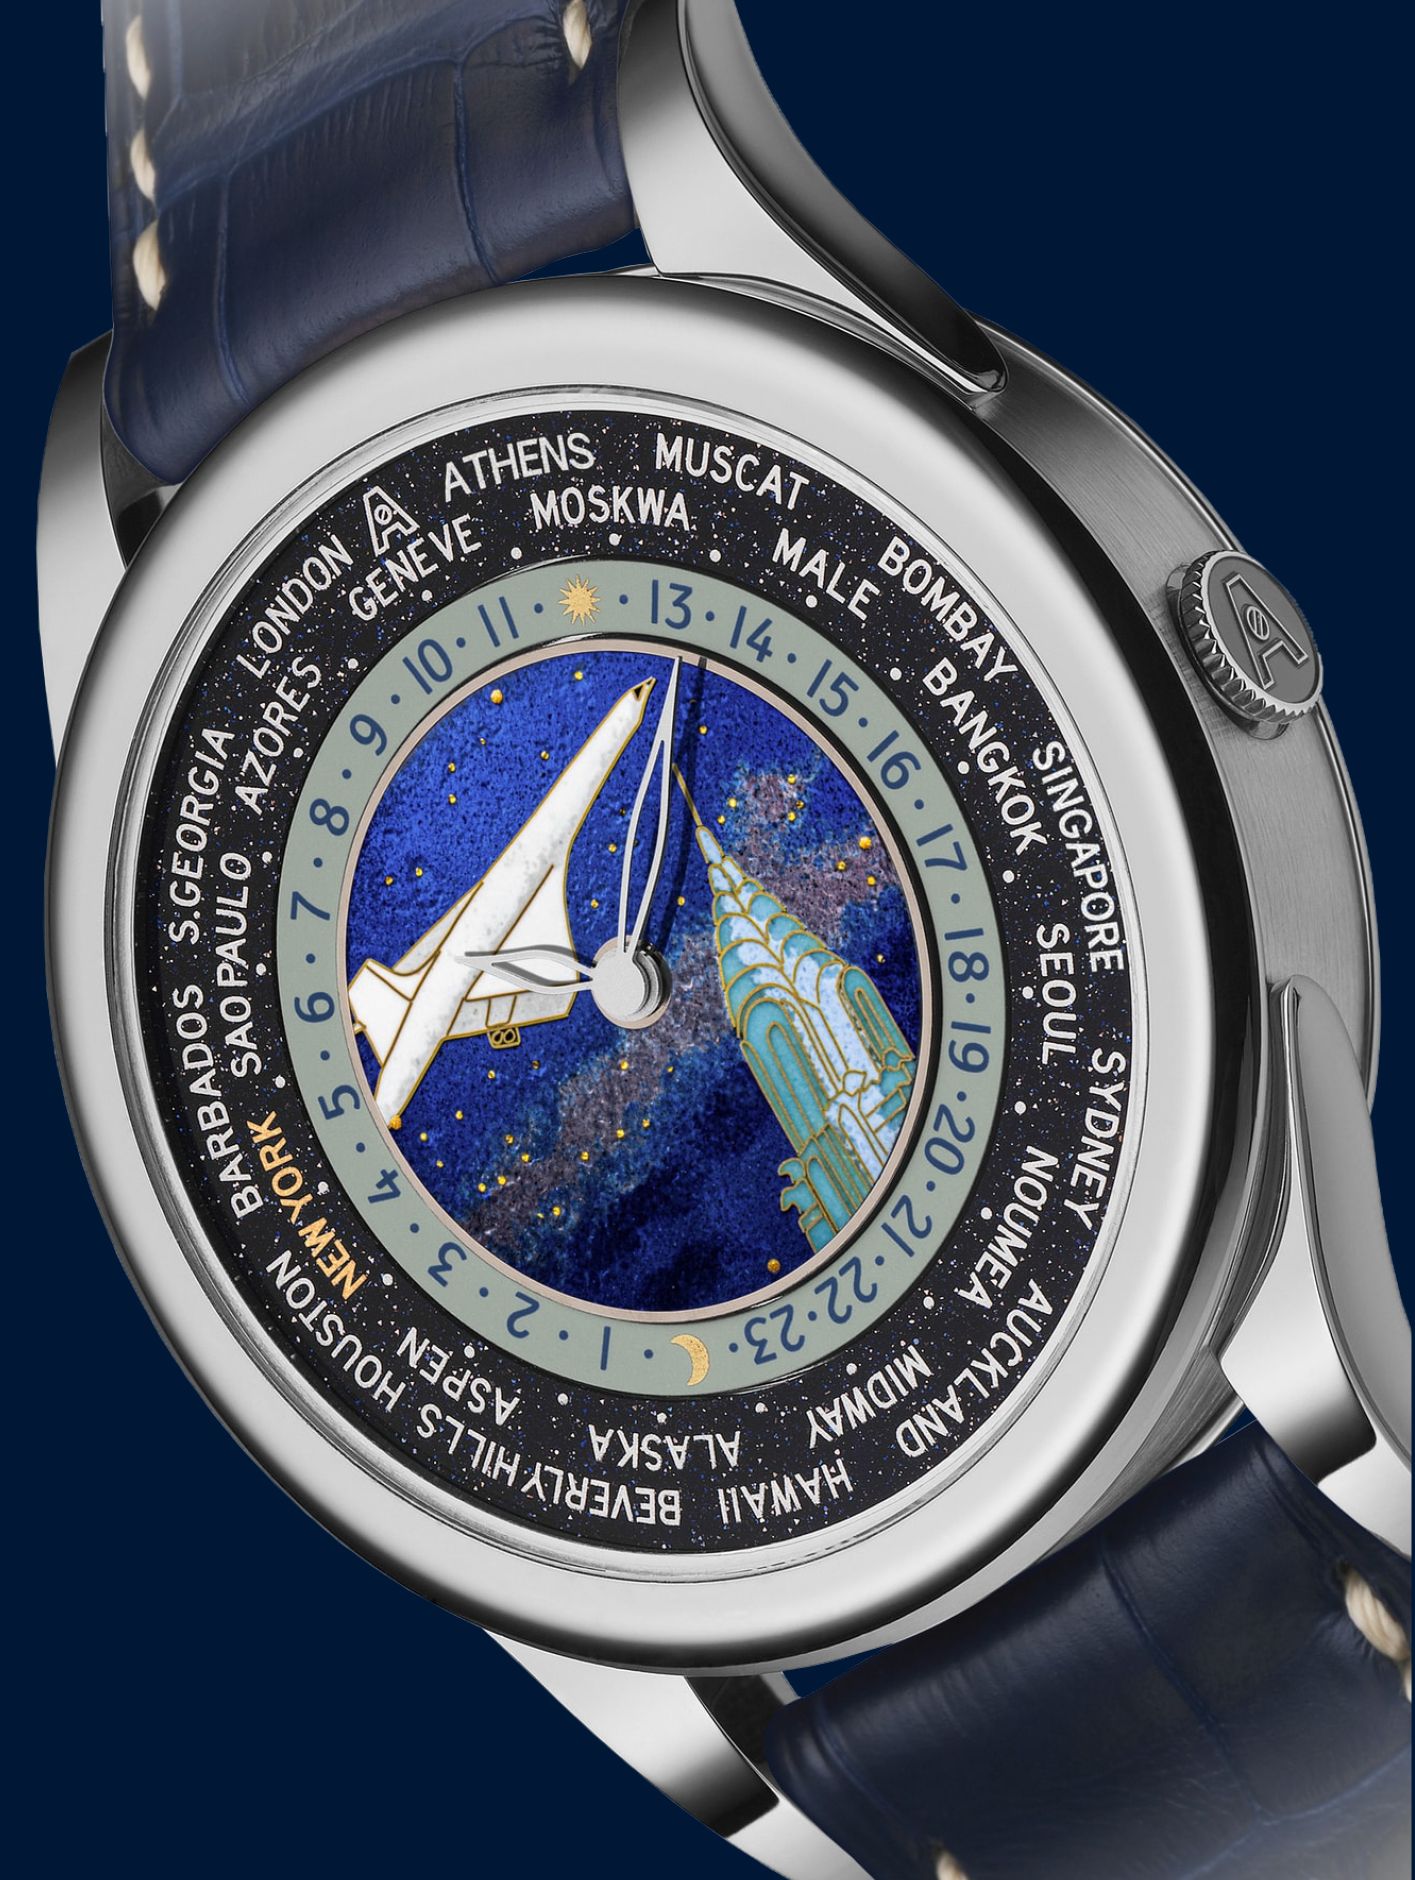 The BCHH Celestial Voyager Supersonic features a champlevé dial depicting the Concorde in flight over the Chrysler Building